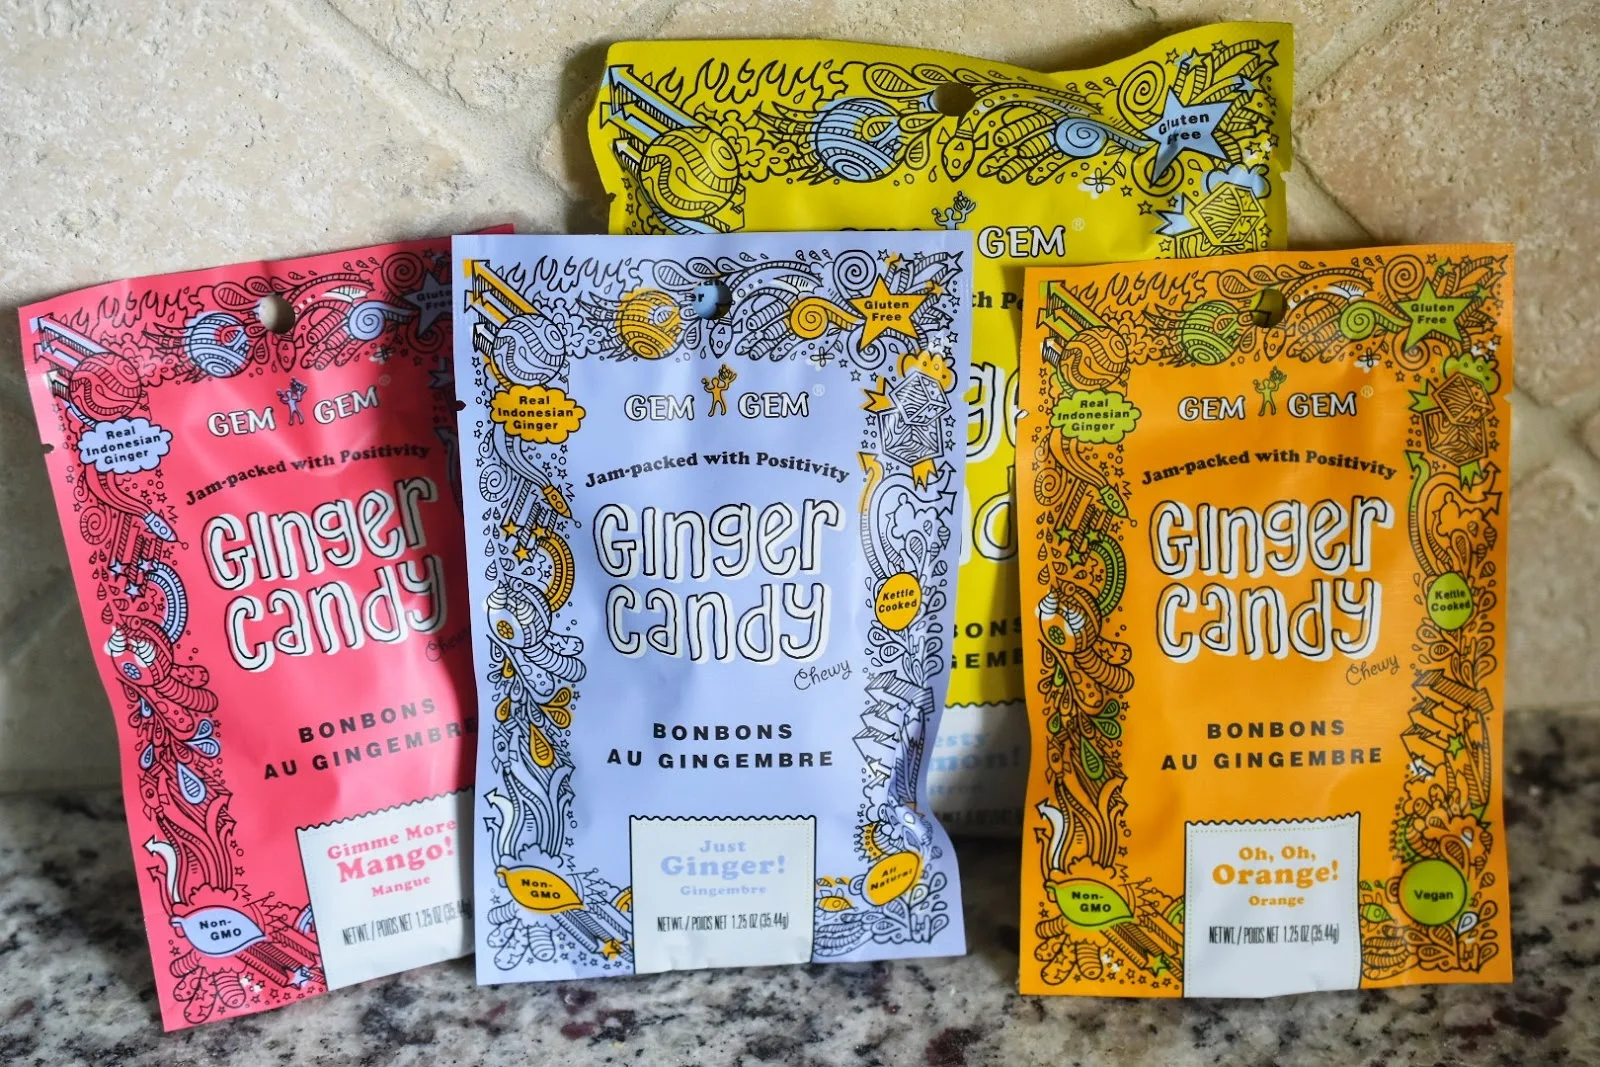 My Road Trip Go-to Healthy Ginger Candy Snack  via  www.productreviewmom.com